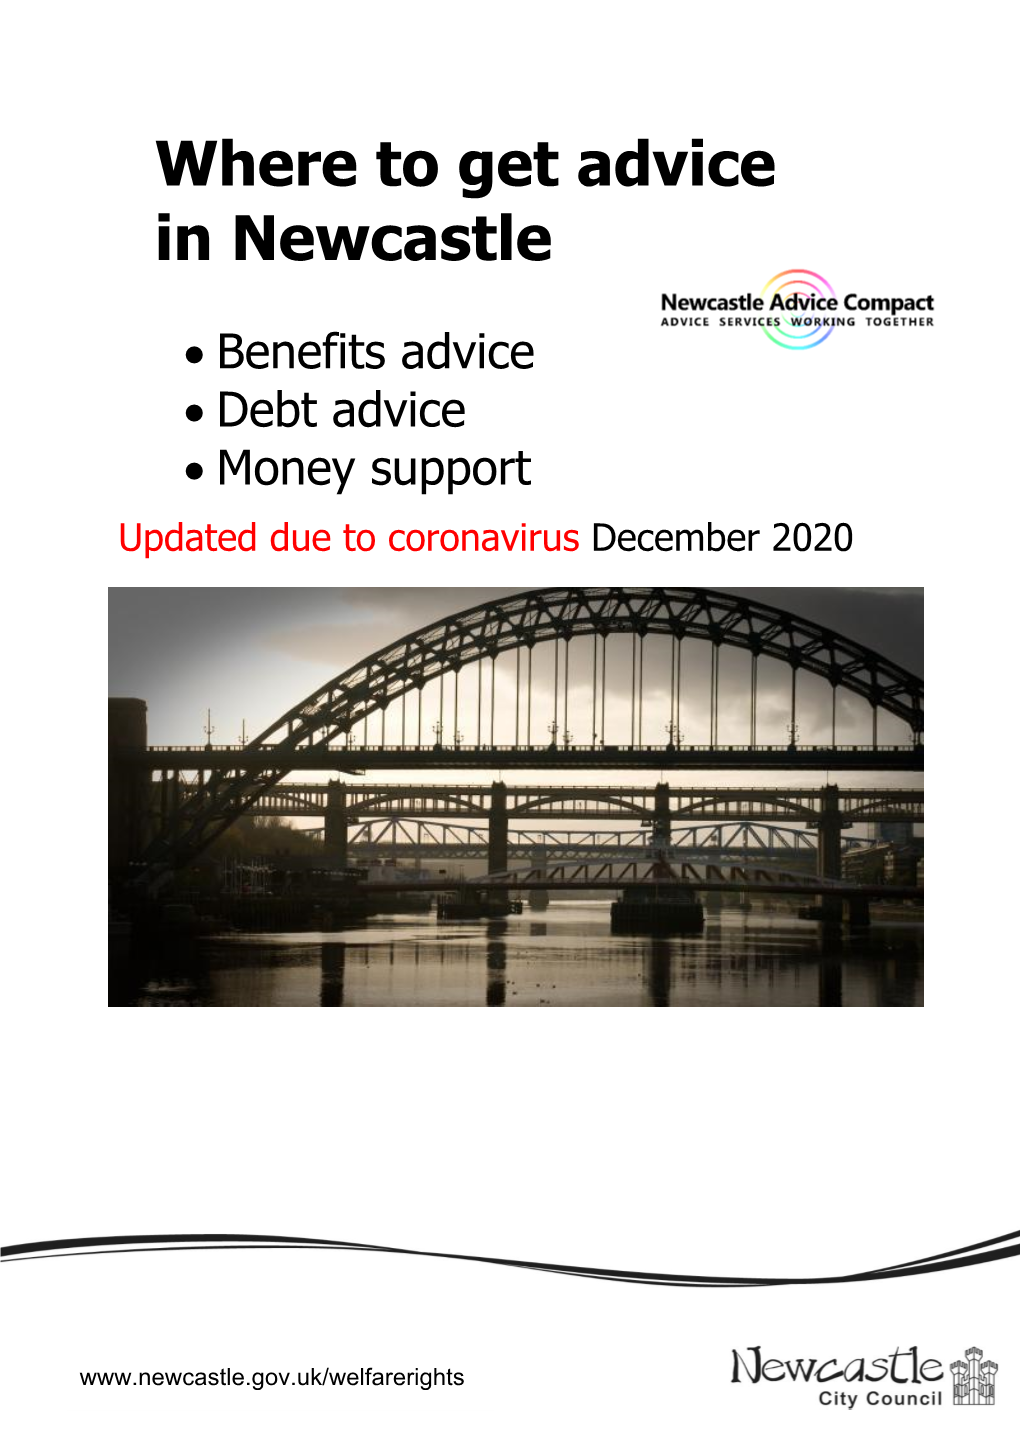 Where to Get Advice in Newcastle